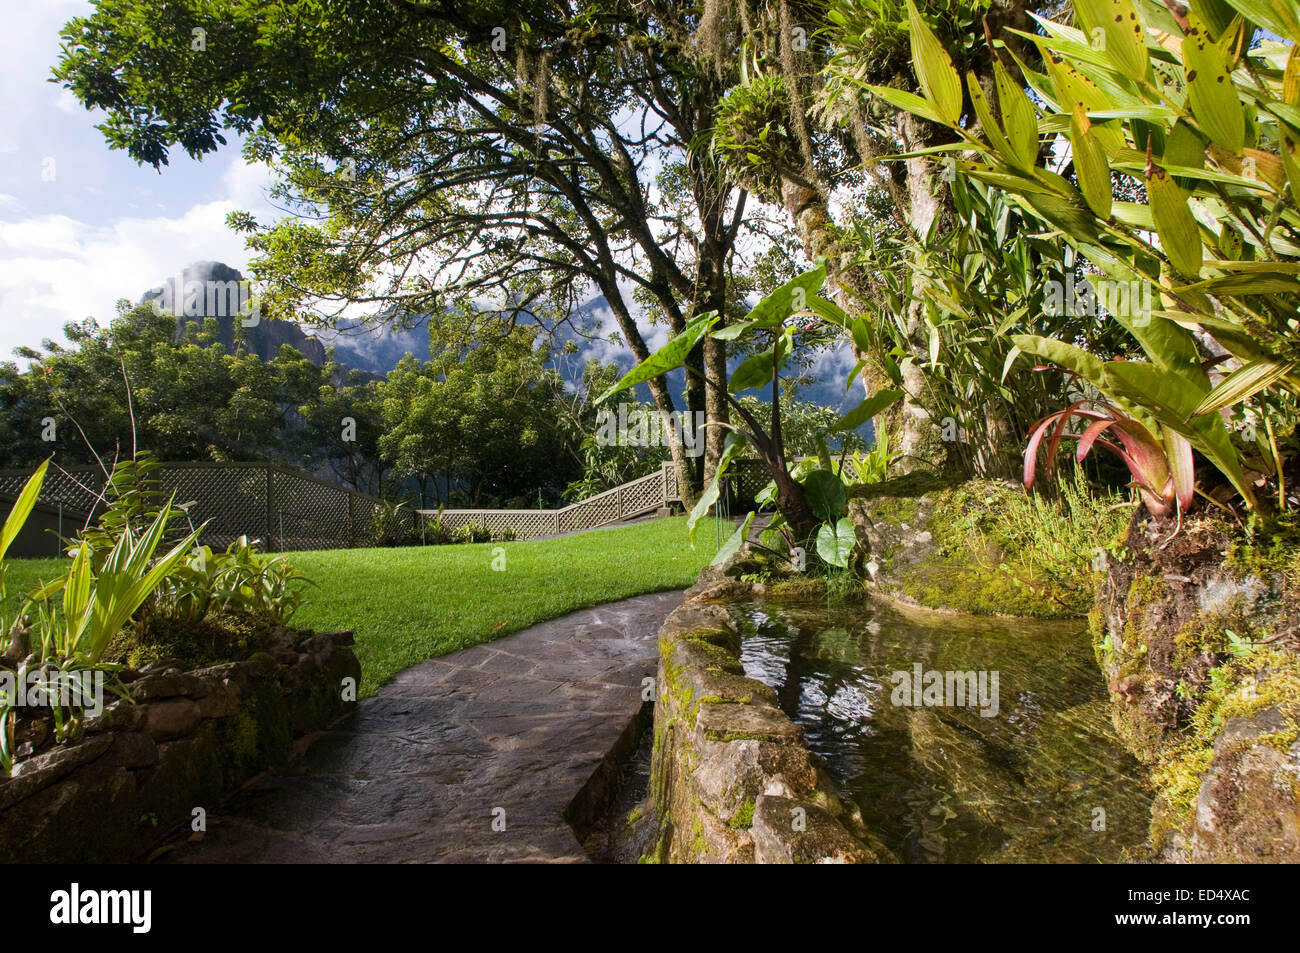 Belmond Sanctuary Lodge - Hotel in Machu Picchu, Peru. Gardens of Machu Picchu Sanctuary Lodge. Located in the back of the build Stock Photo